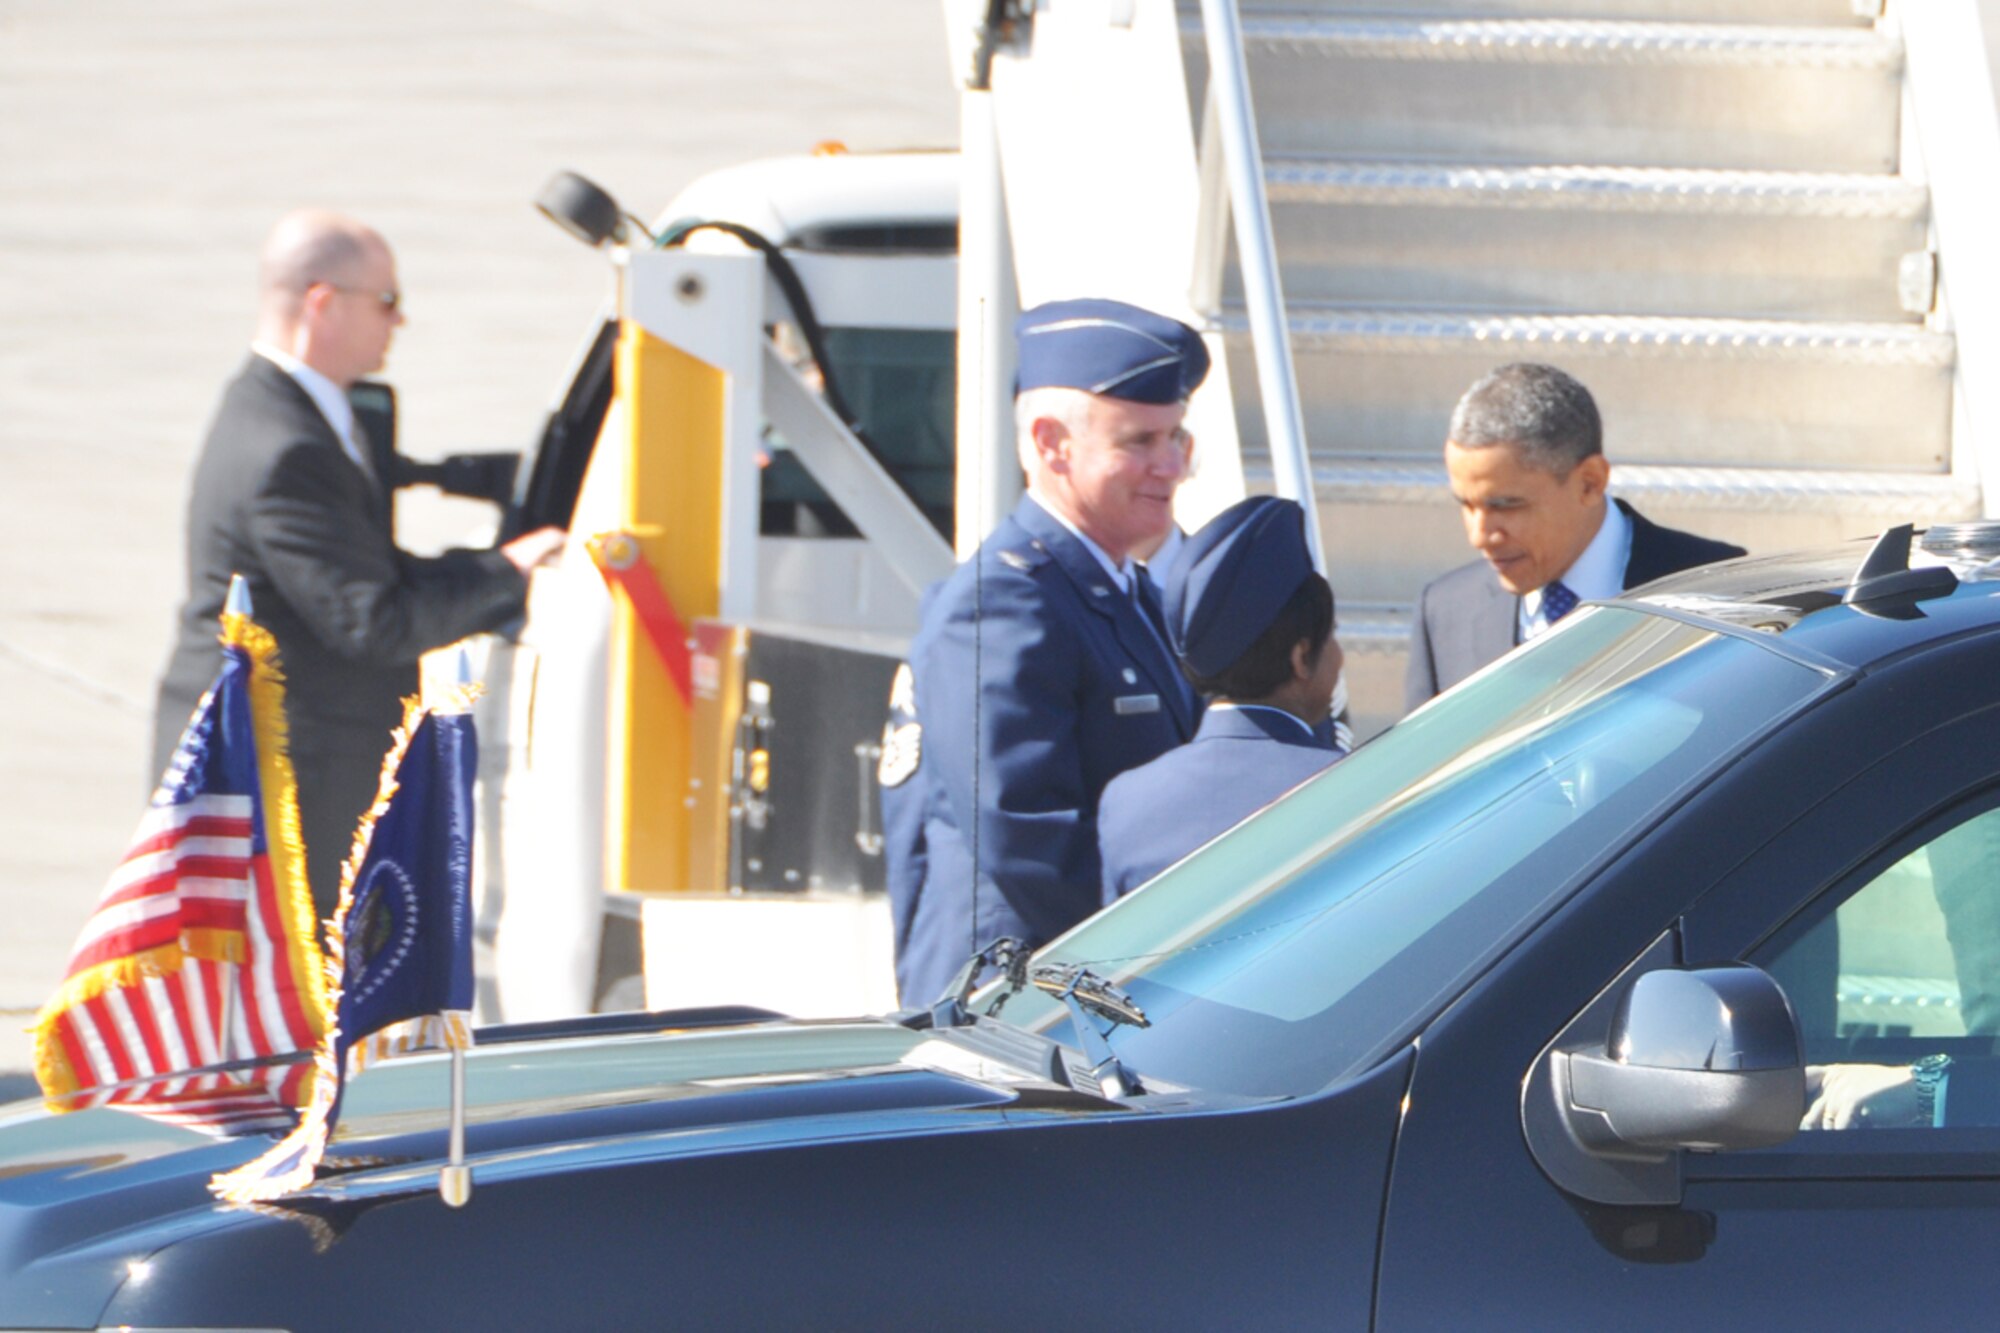 Col. Steven R. Clayton, 94th Operations Group commander and Senior Airman Tumyra D. Byron, knowledge management specialist, greet President Barack Obama during his visit to Dobbins Air Reserve Base, Feb. 14. The president was en-route to the City of Decatur Recreation Center to discuss proposals outlined in his recent state of the union address. Bryon received a President’s Coin from Obama during the visit. (U.S.Air Force photo/James Branch)